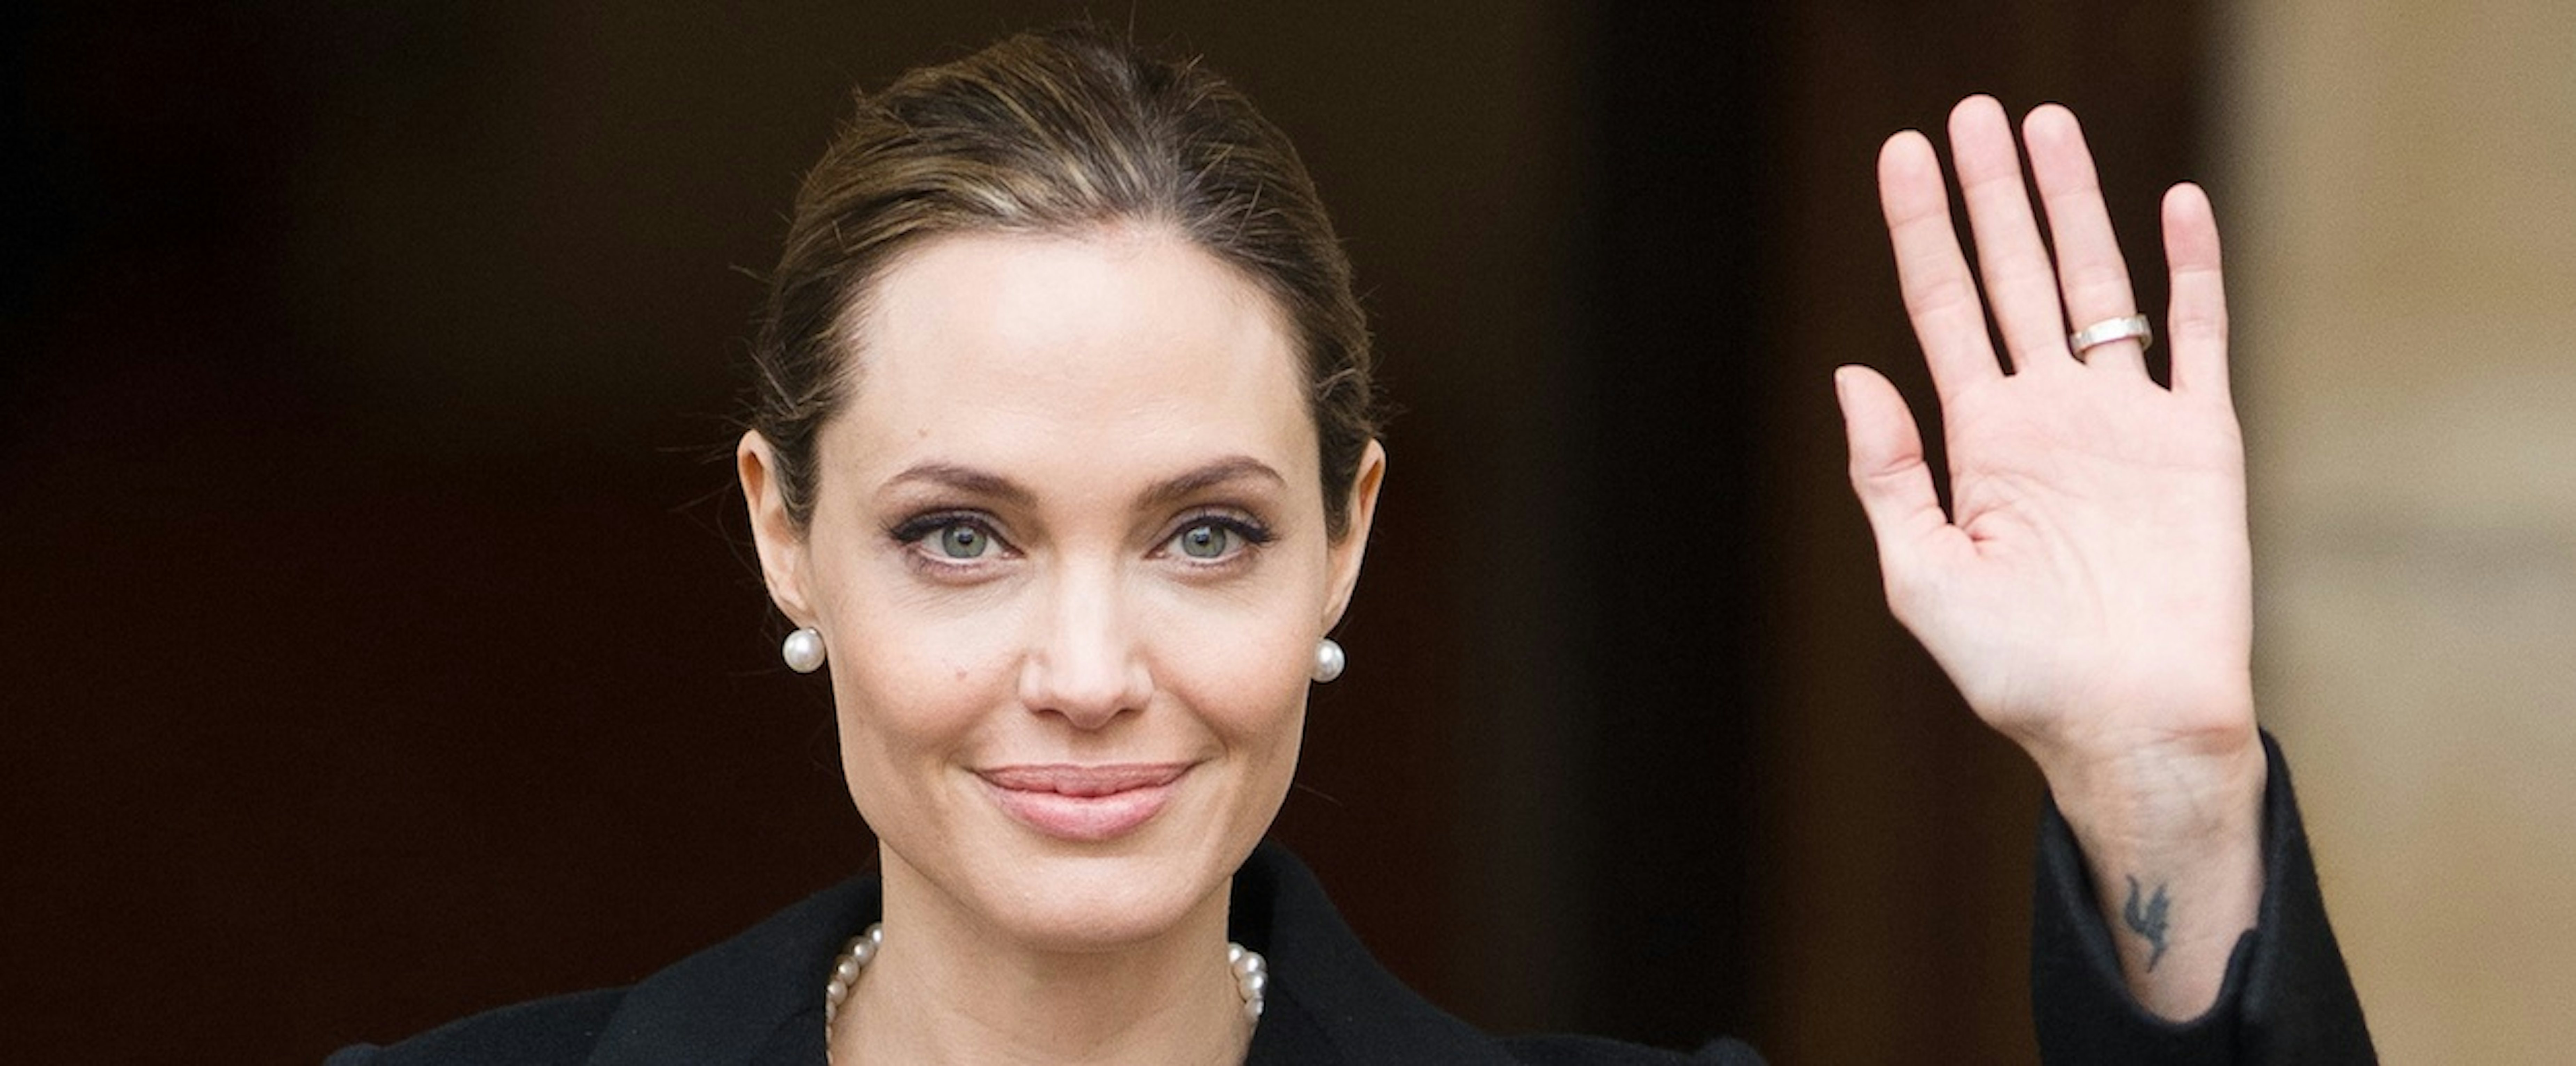 Celebrity Causes: Does Angelina Jolie Make a Difference? | The New Republic